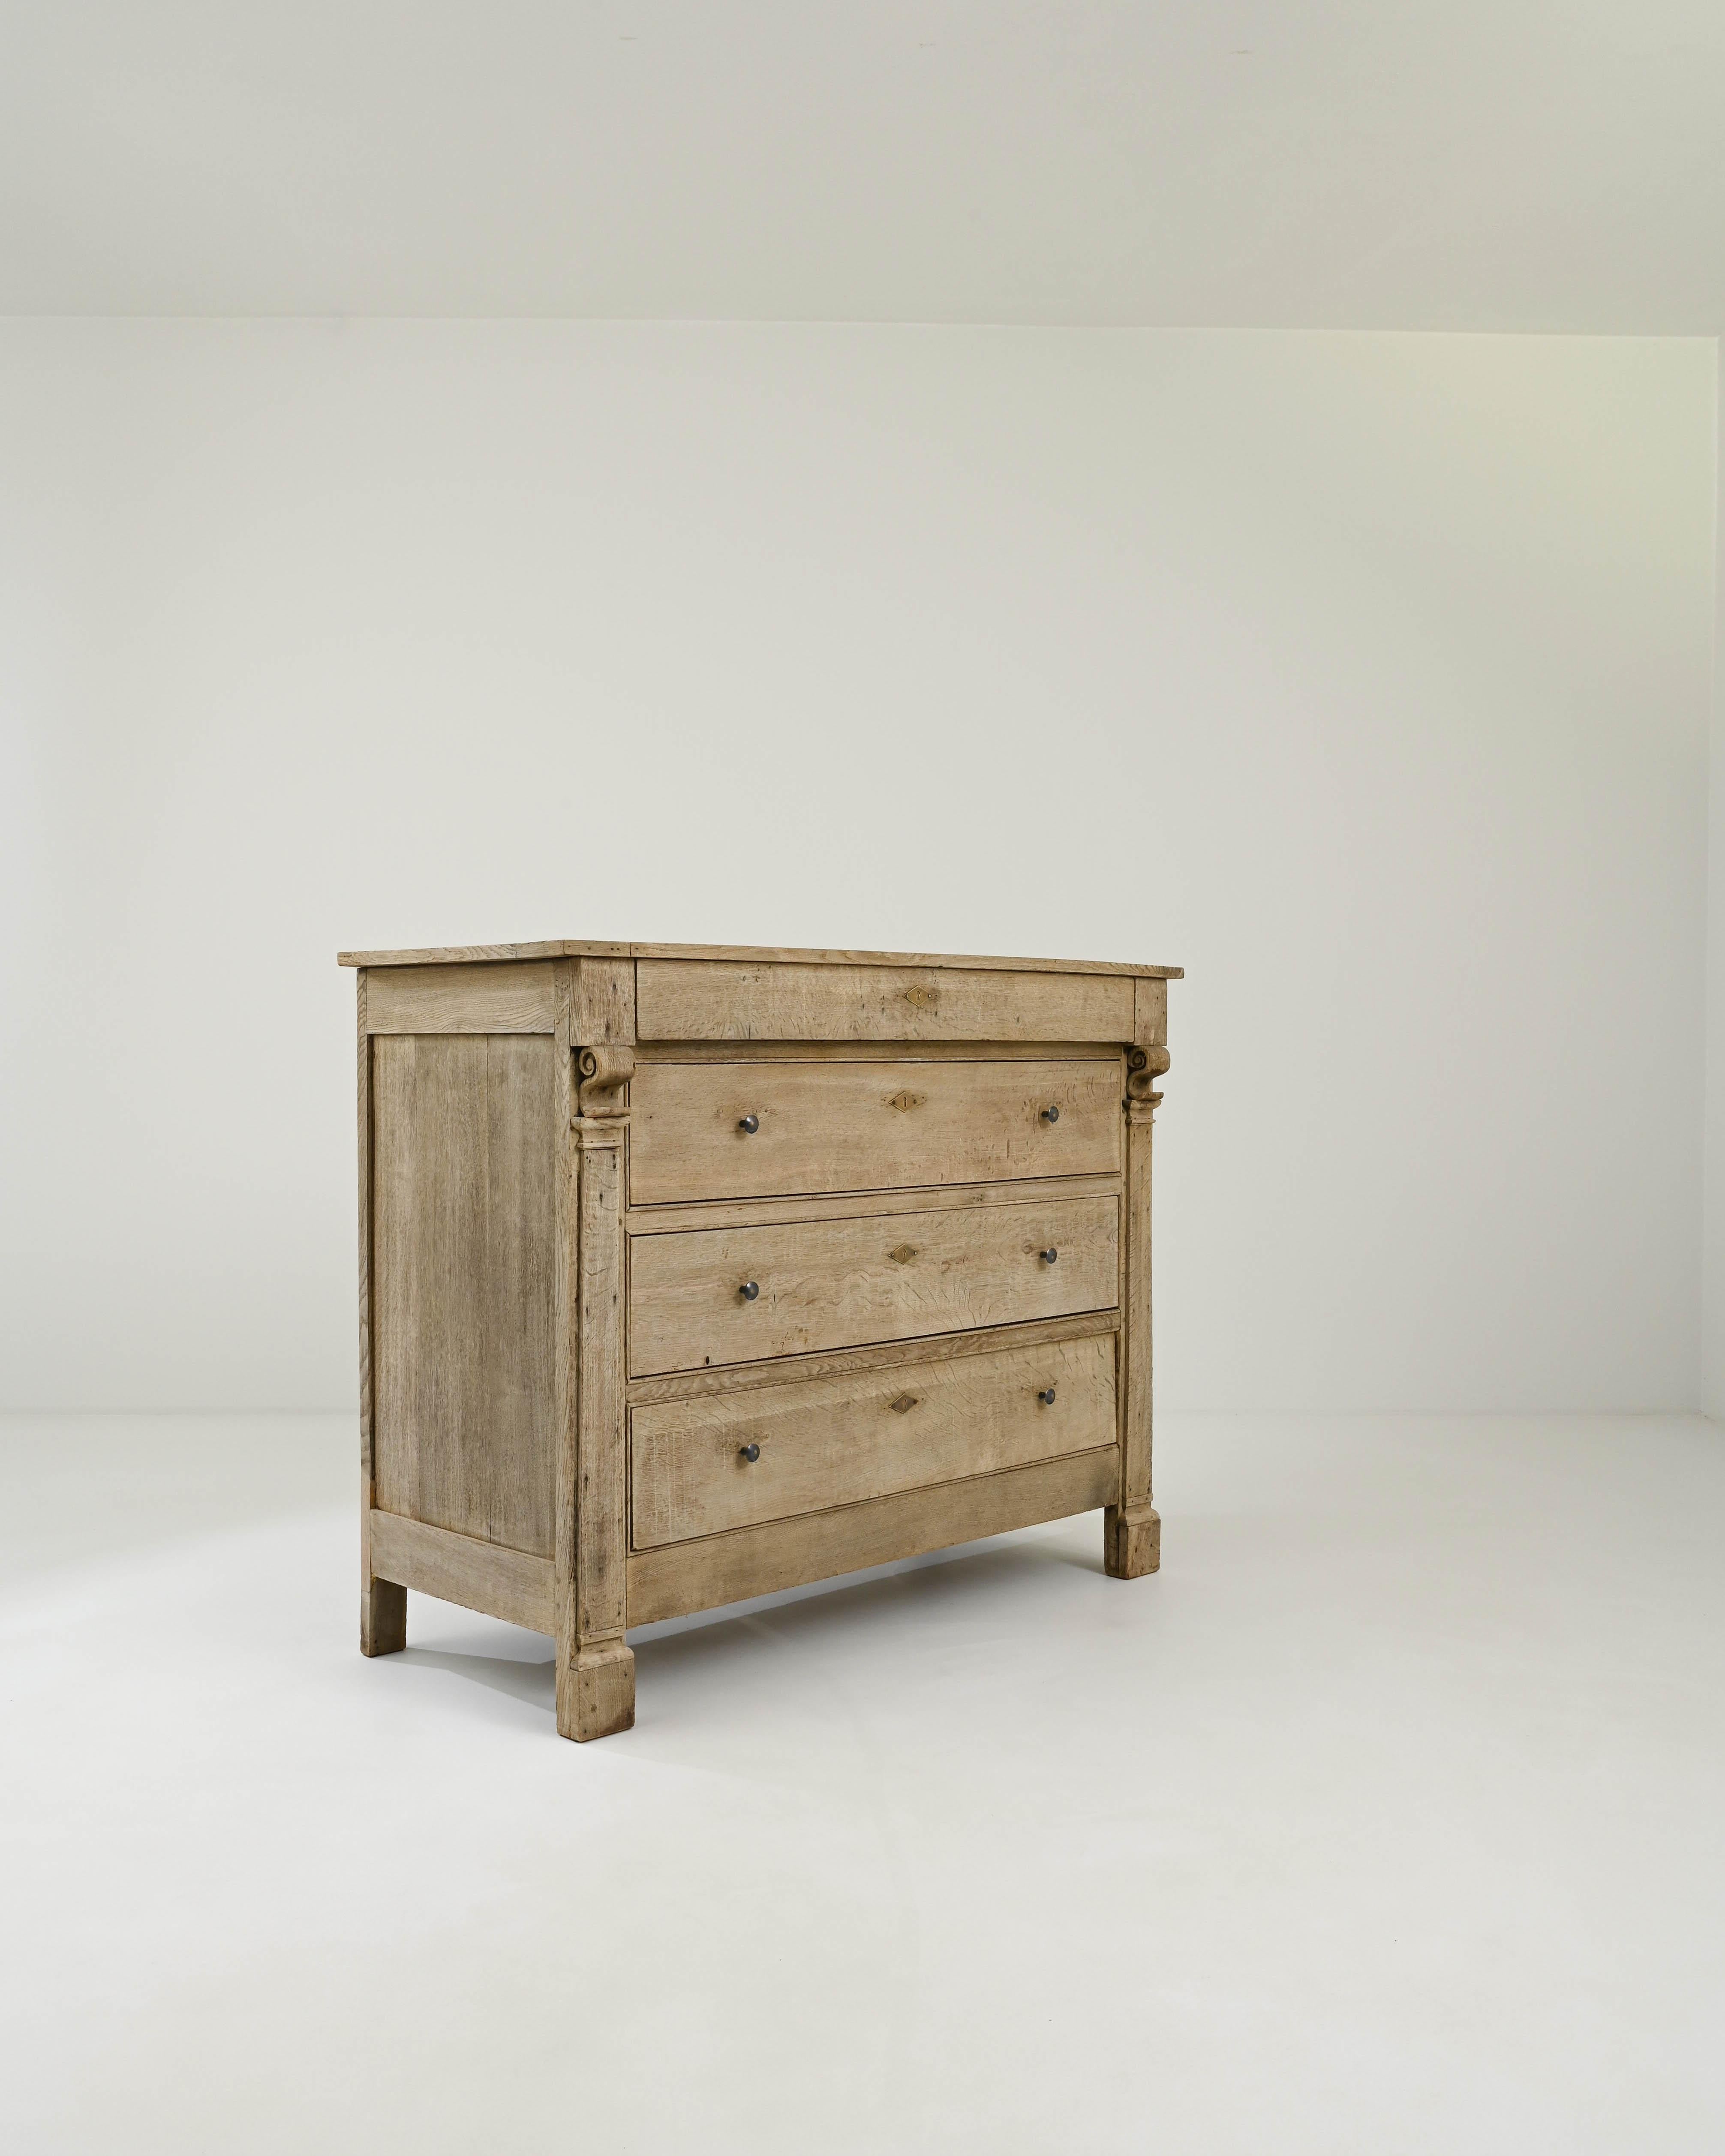 The reserved neoclassical elegance shines through the straightforward design of this 19th-century chest of drawers crafted in France. Three spacious drawers are adorned with carved columns topped with skillful scroll carvings. Together with the